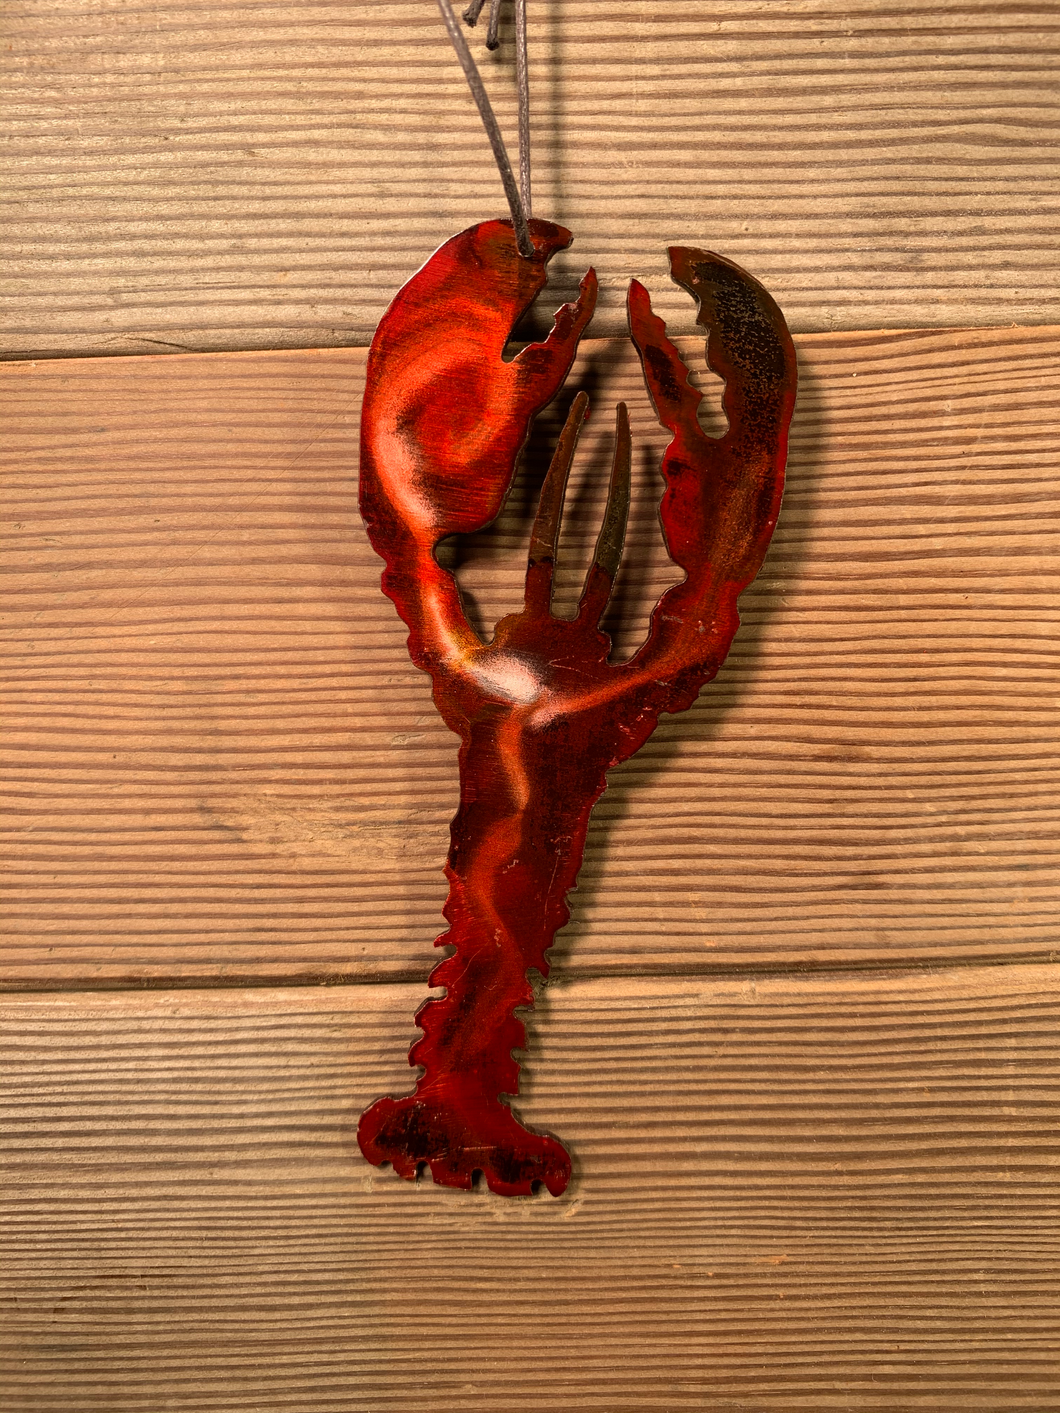 Lobster - Hand Painted Ornament